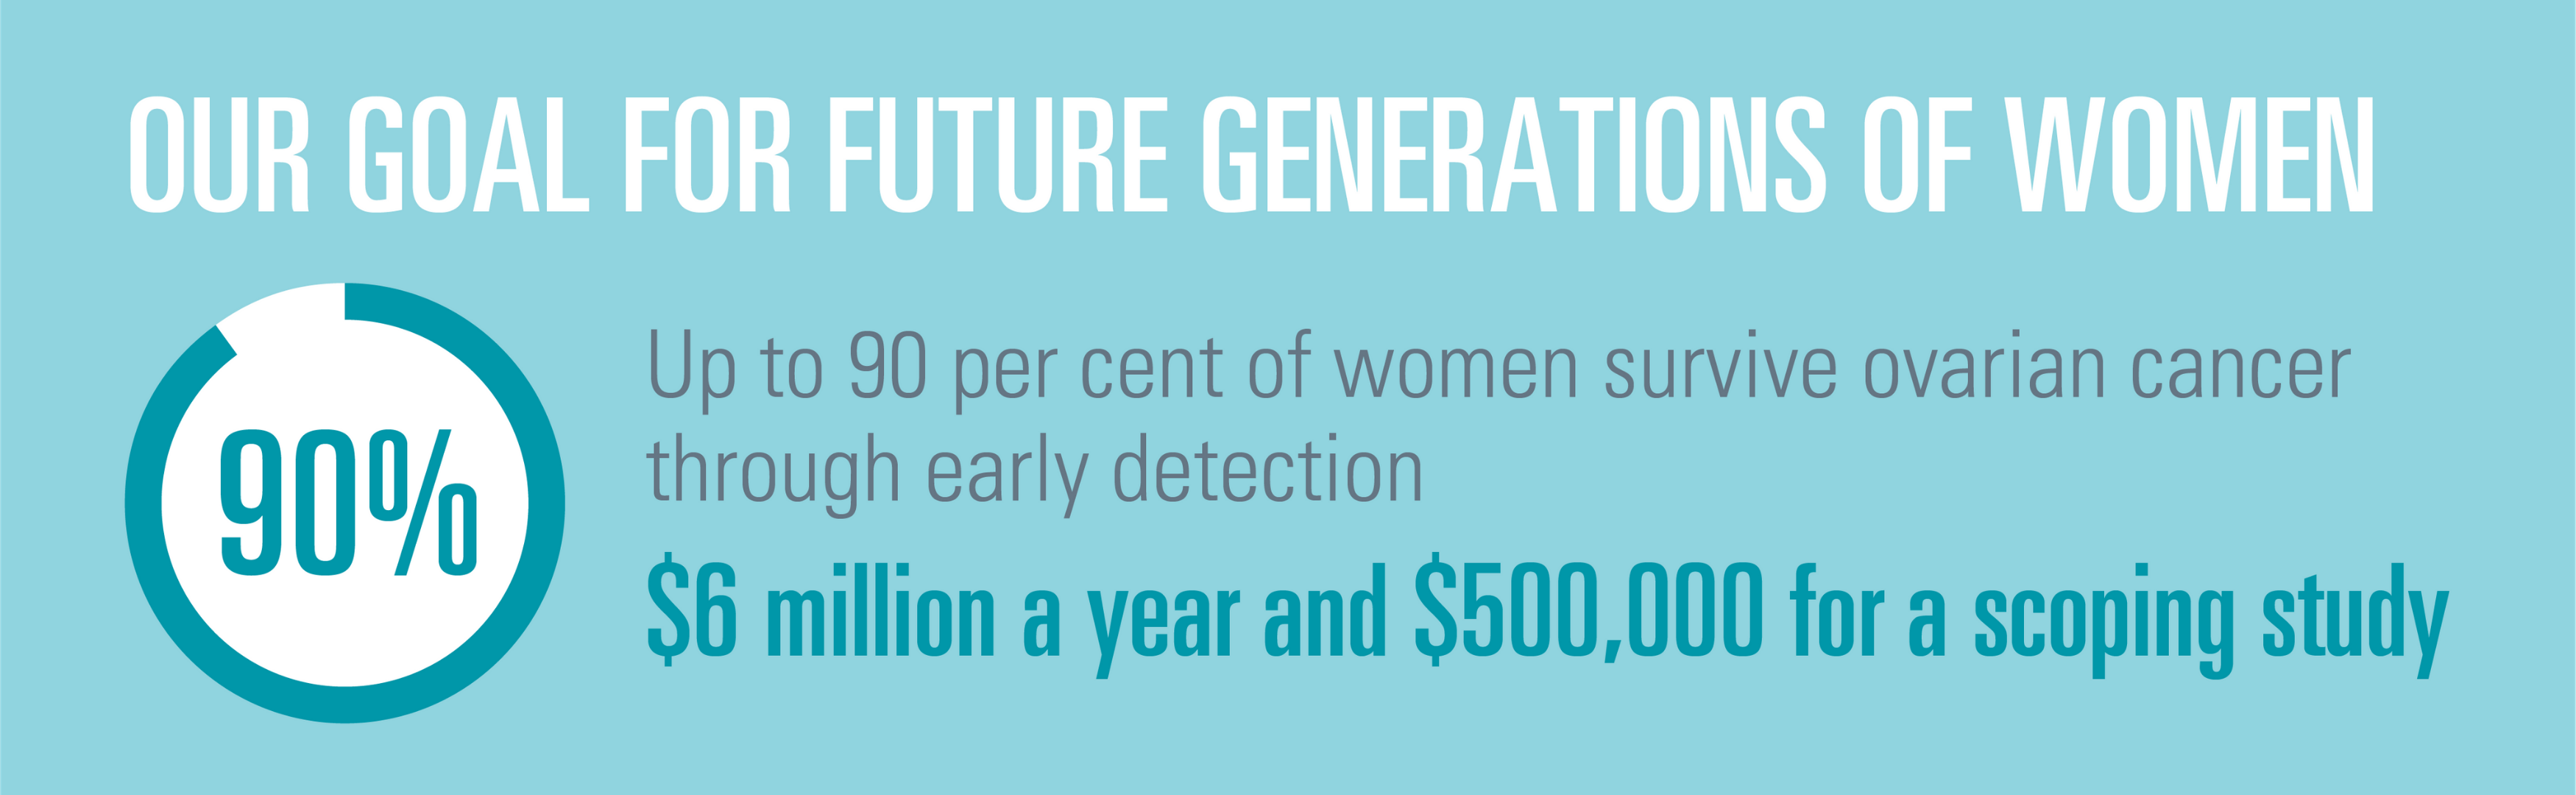 Image outlining goal 3: our goal for future generations of women. Up to 90 per cent of women survive ovarian cancer through early detection. $6 million a year and $500,000 for a scoping study.